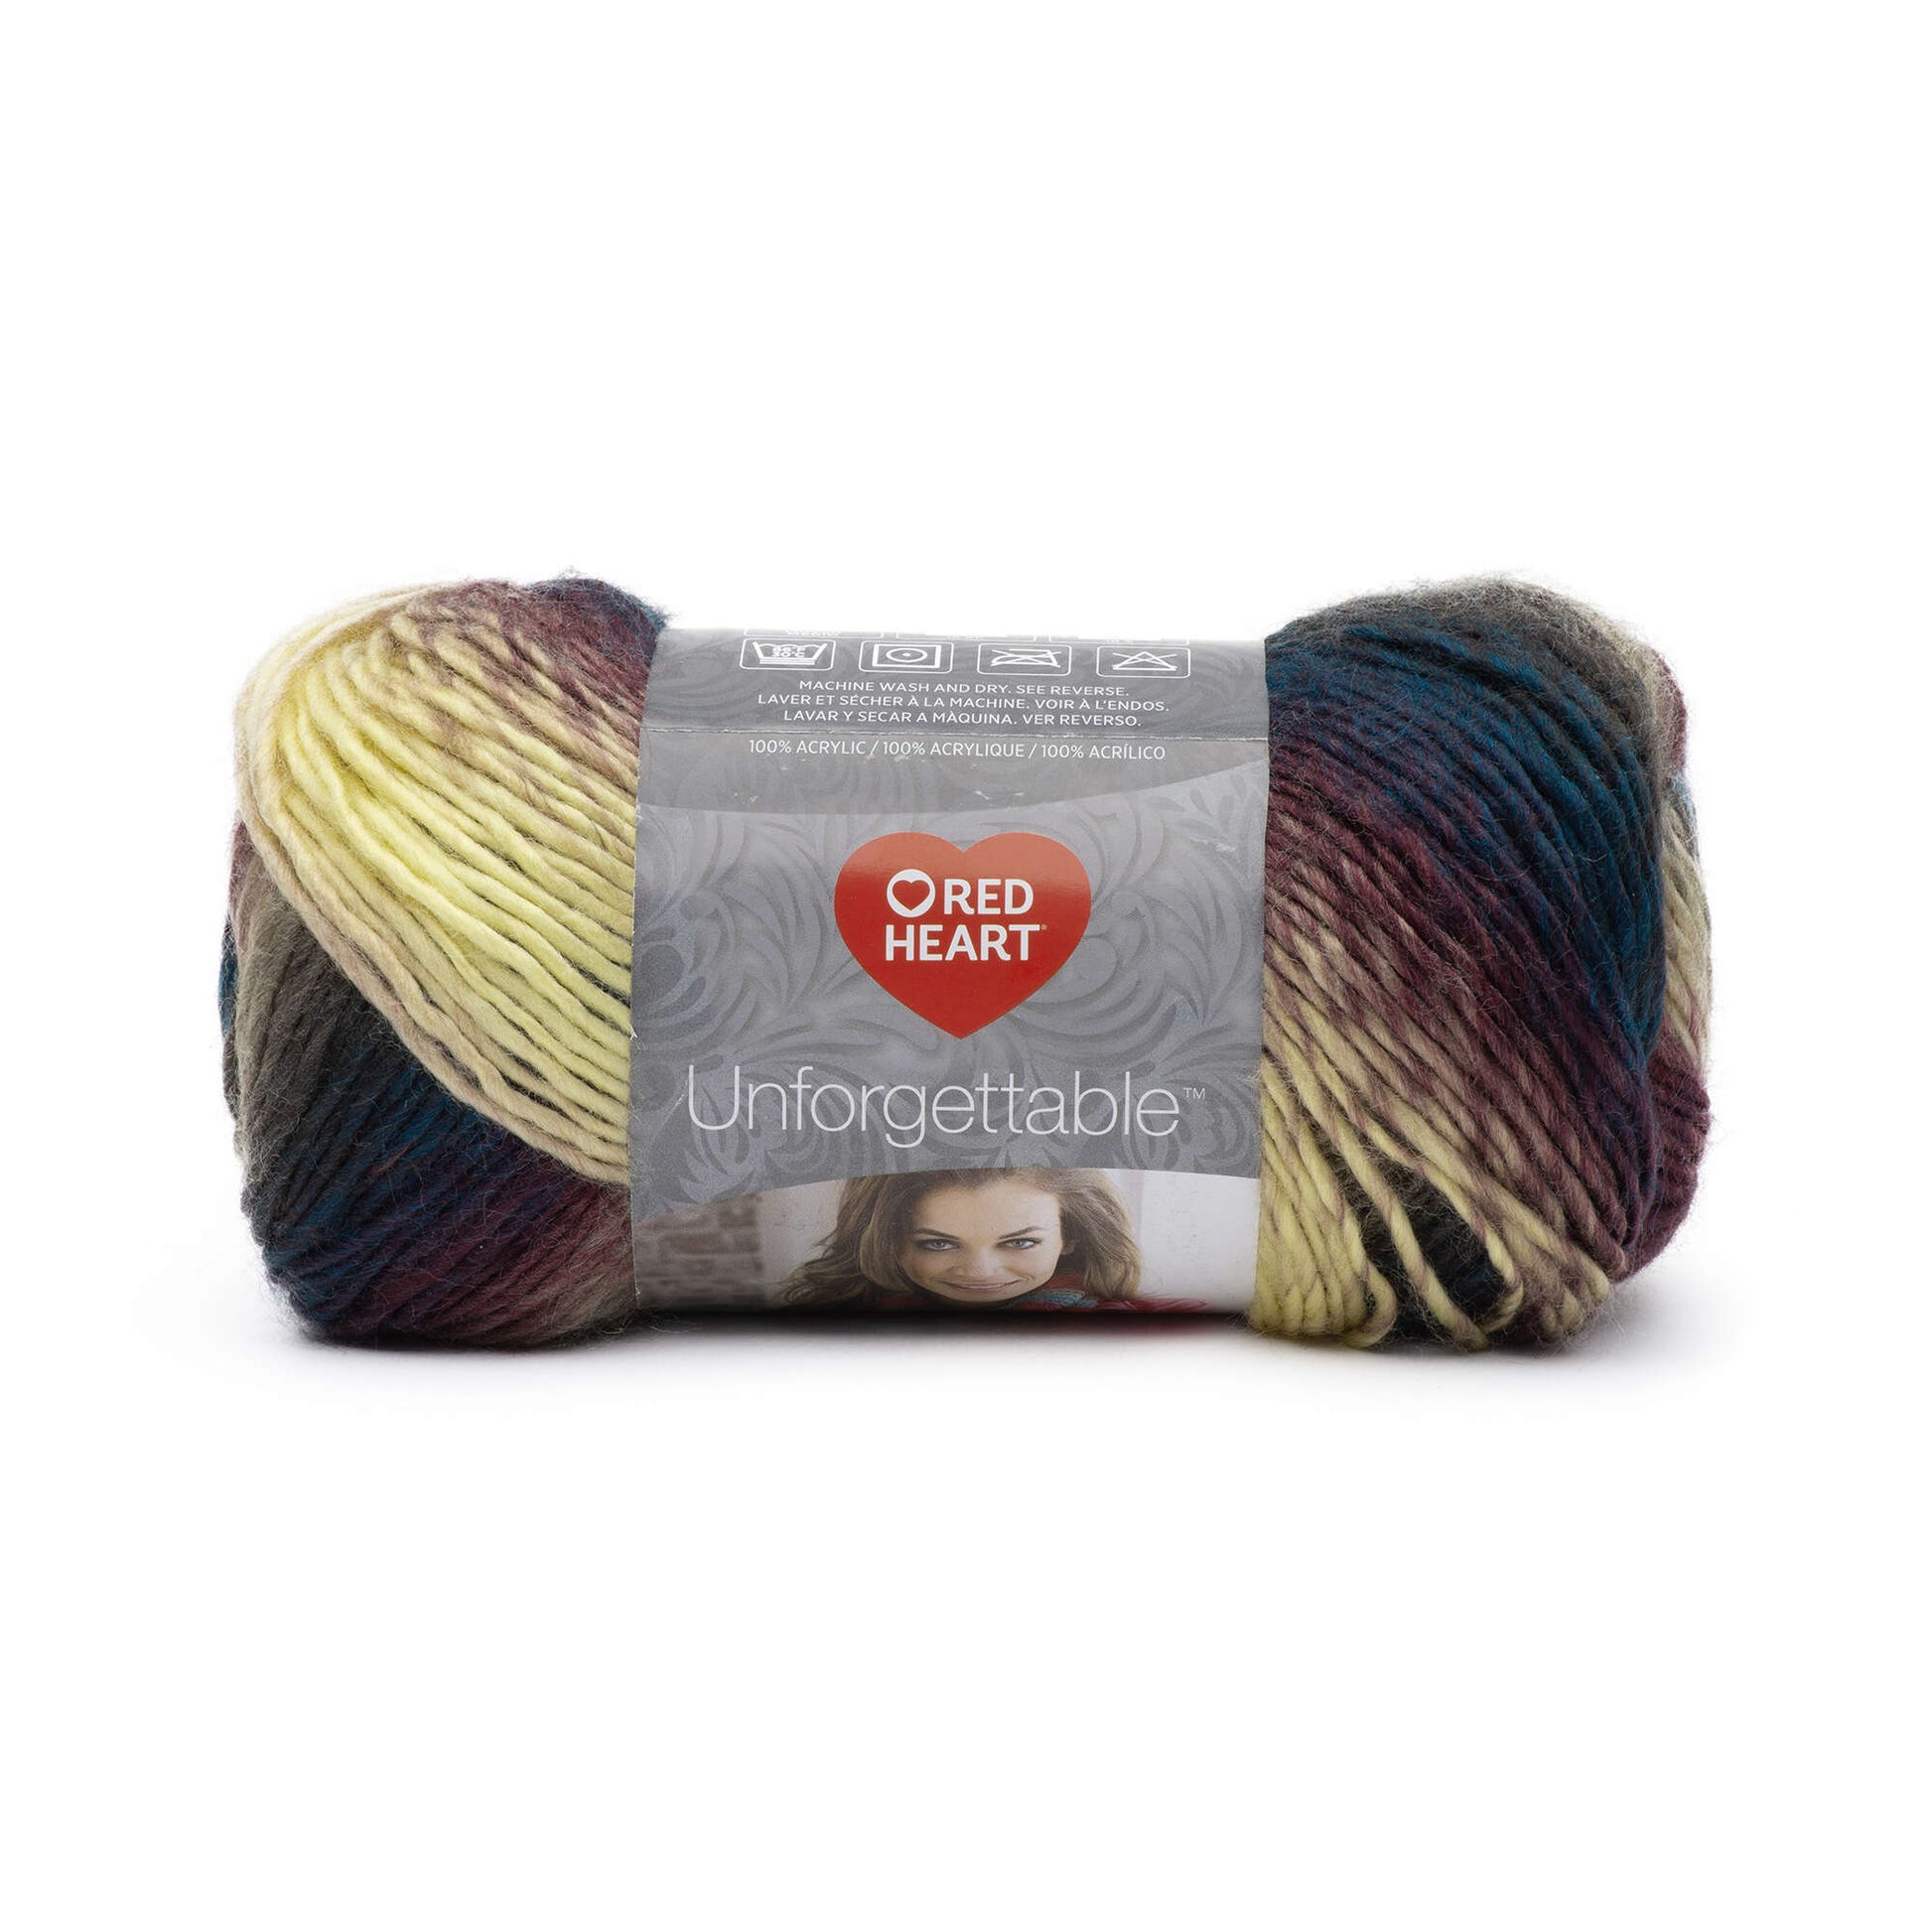 Red Heart Unforgettable Yarn - Discontinued shades